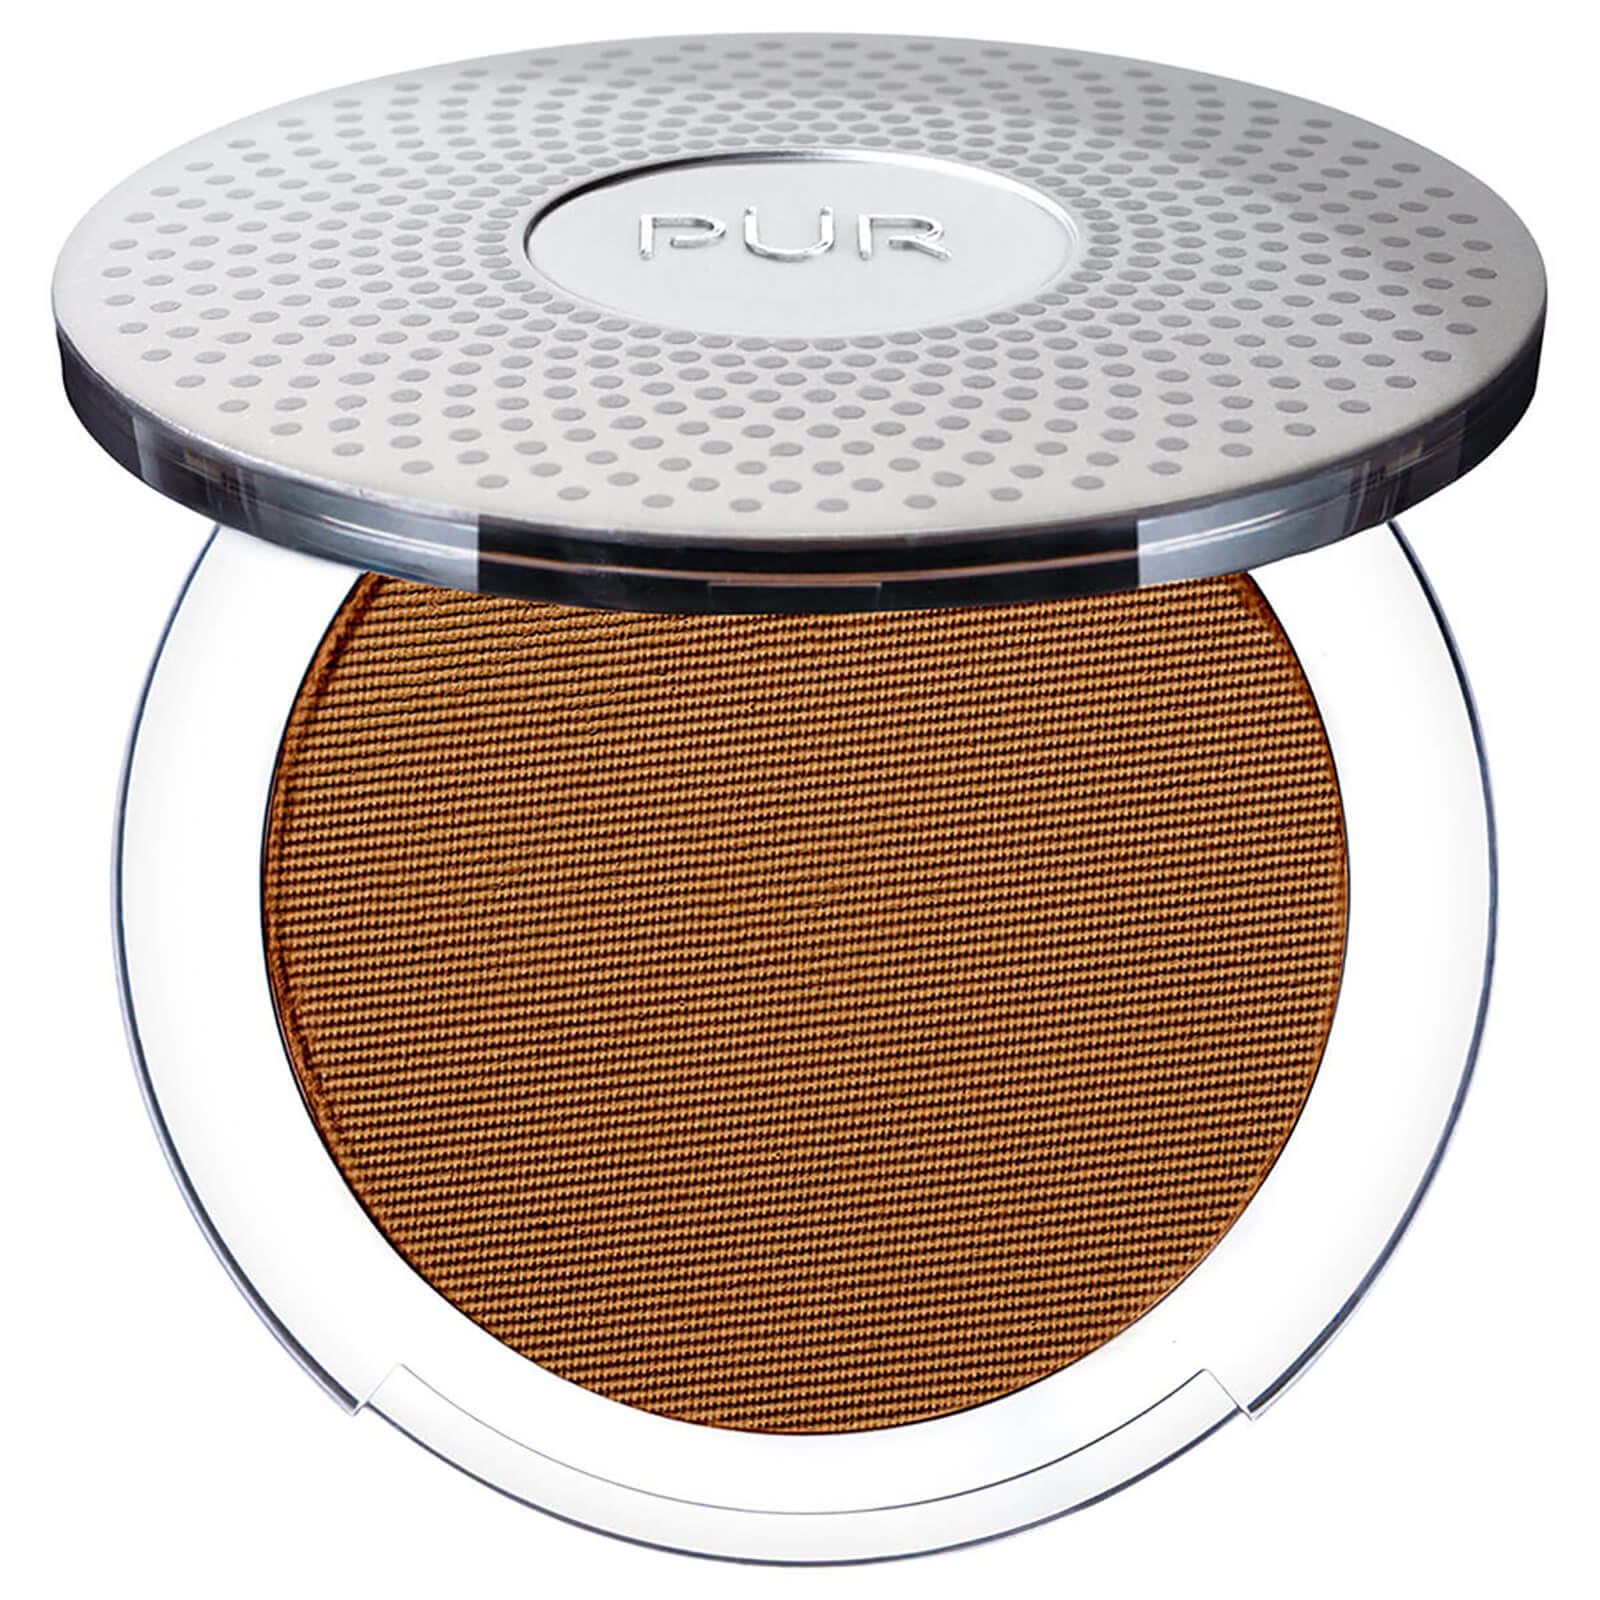 PÜR 4-in-1 Pressed Mineral Make-up 8g (Various Shades) - DG7 Cocoa